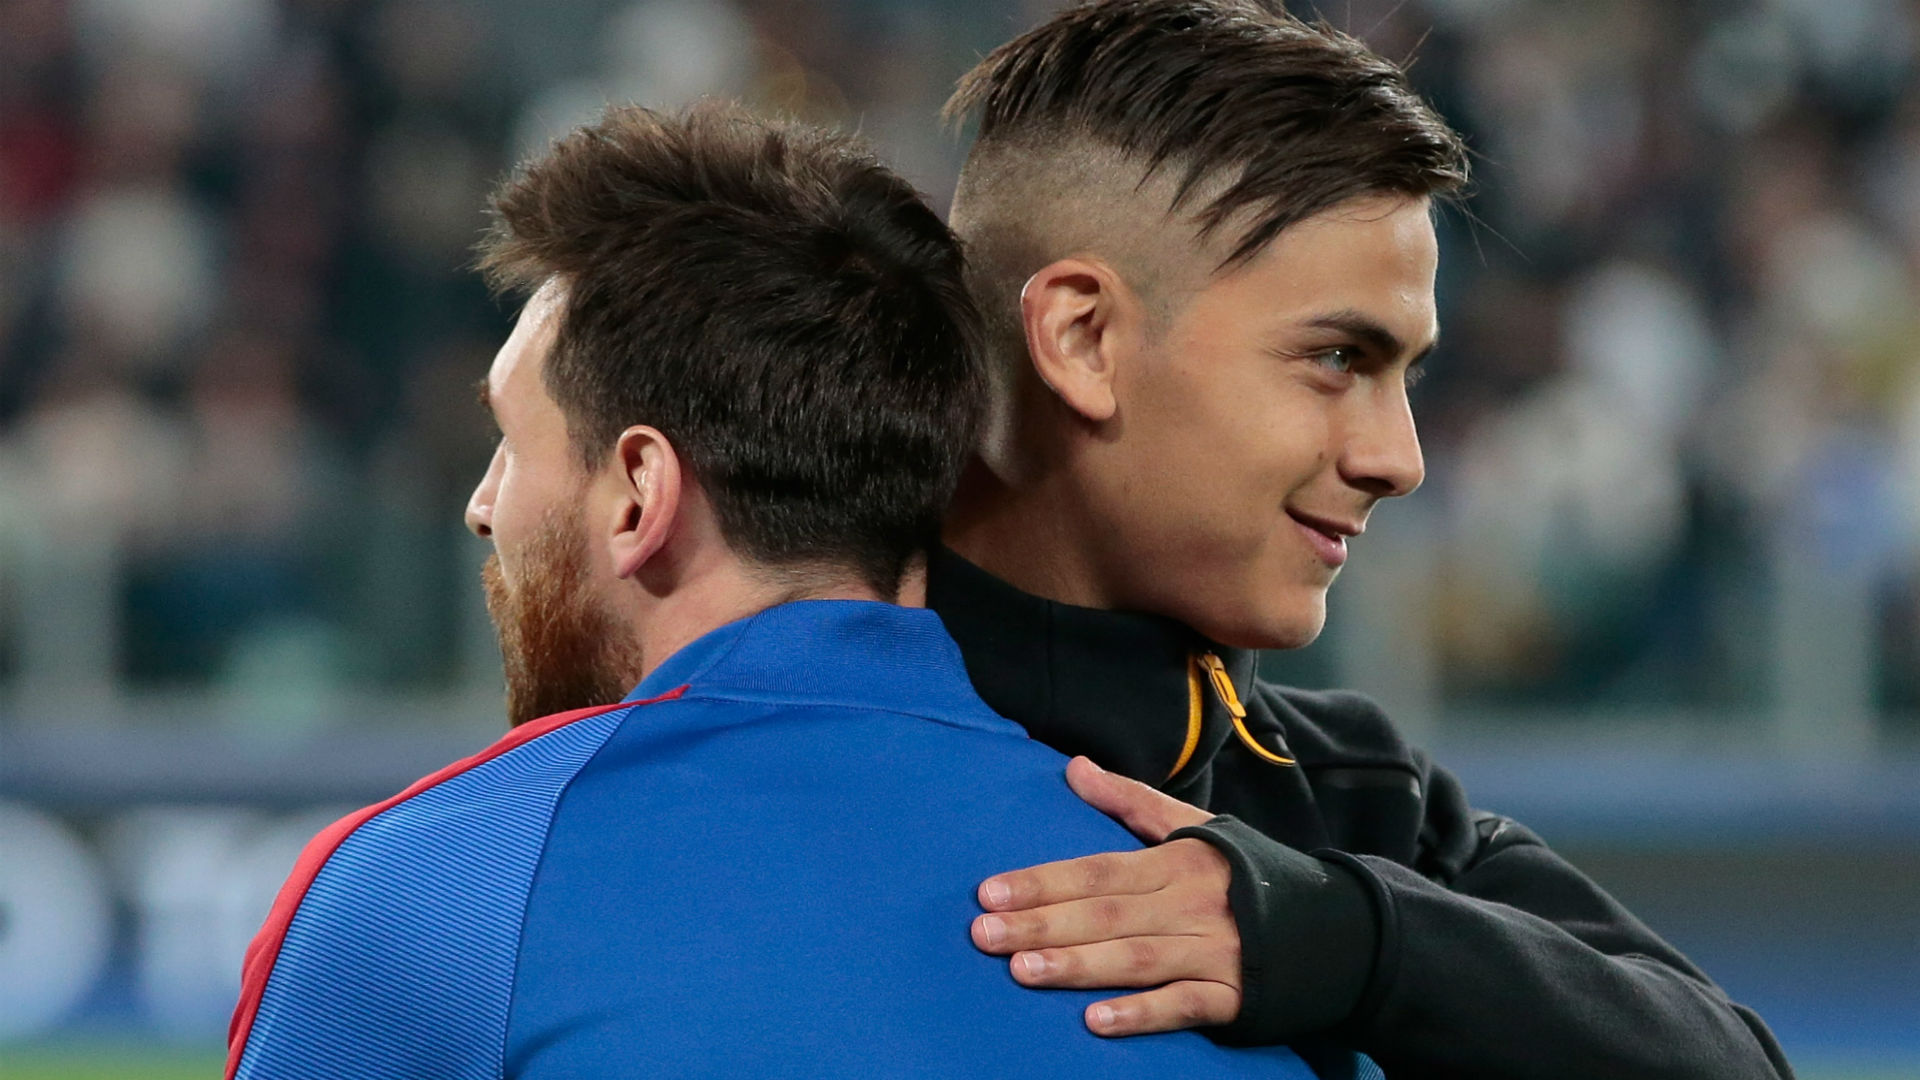 Messi has his story, I have mine - Dybala plays down compatriot comparisons